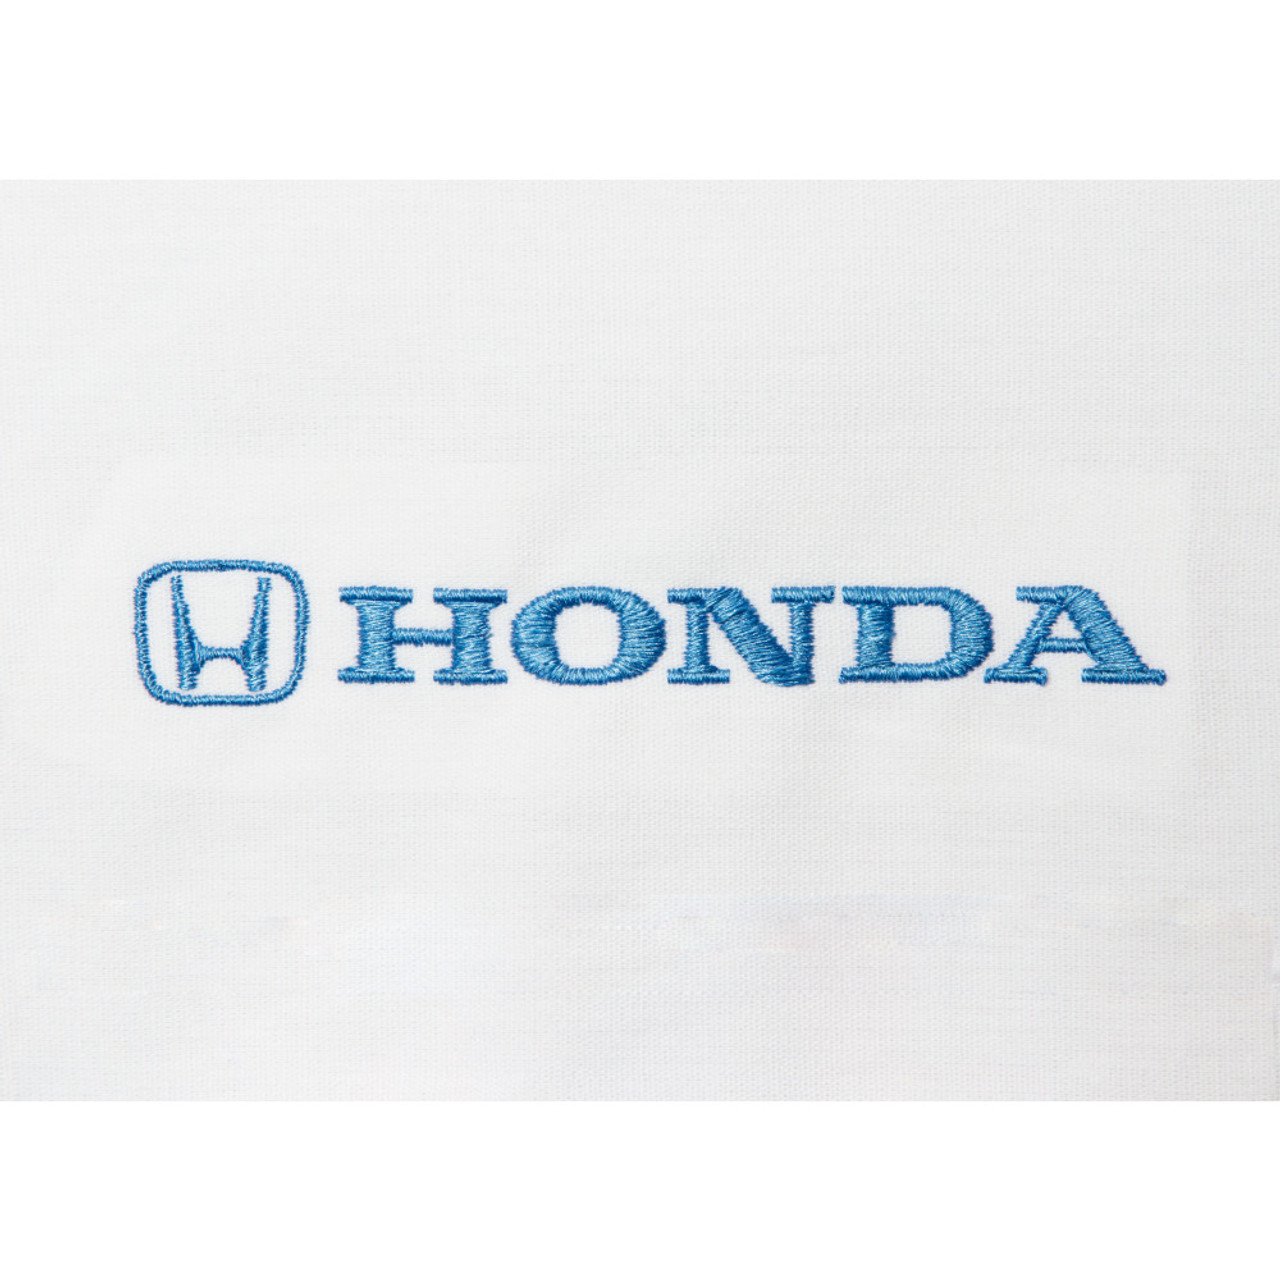 Unique Honda wings sticker logo for in custom colors and sizes